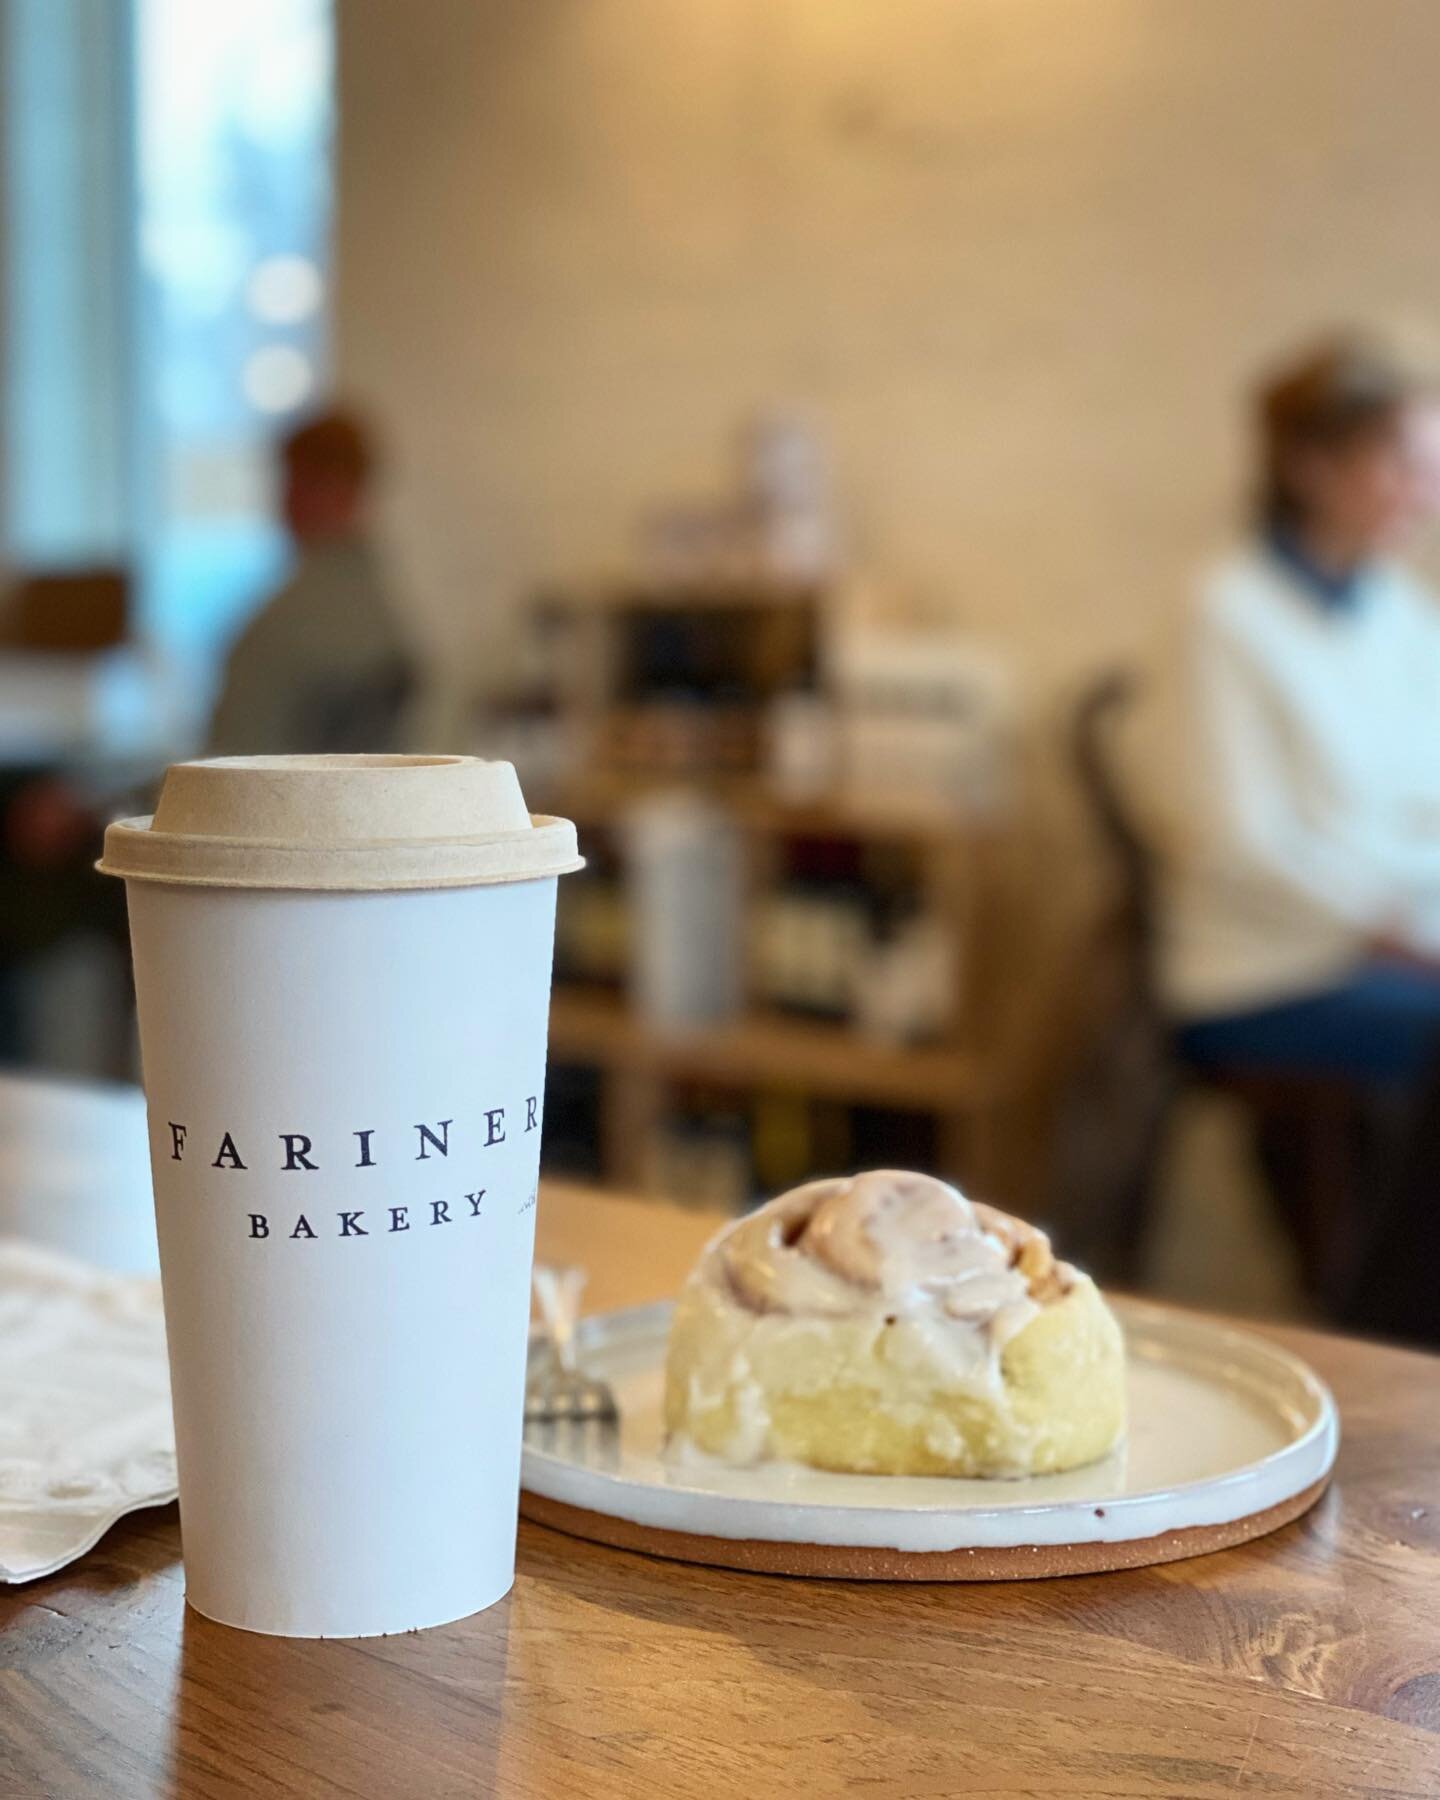 Ventured over to Ashland this morning to check out the new @farinerbakery, and it&rsquo;s the French-inspired small town bakery of my dreams.

Here&rsquo;s what we tried:
&bull; cinnamon roll
&bull; raspberry cream cheese roll
&bull; oatmeal chocolat